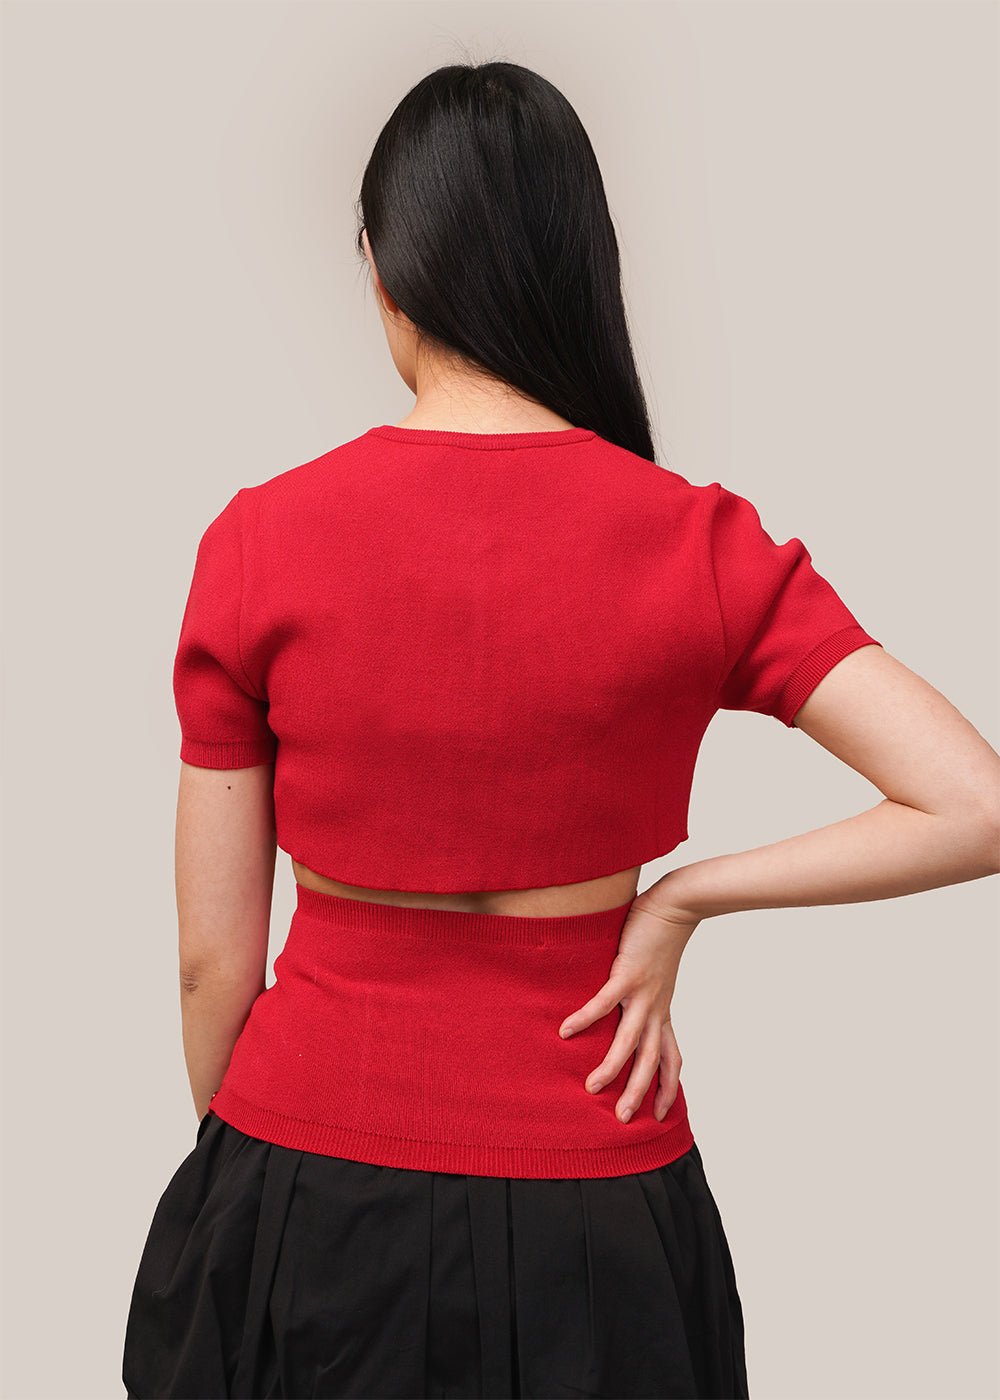 AMOMENTO Red Crop Button Cardigan Set - New Classics Studios Sustainable Ethical Fashion Canada